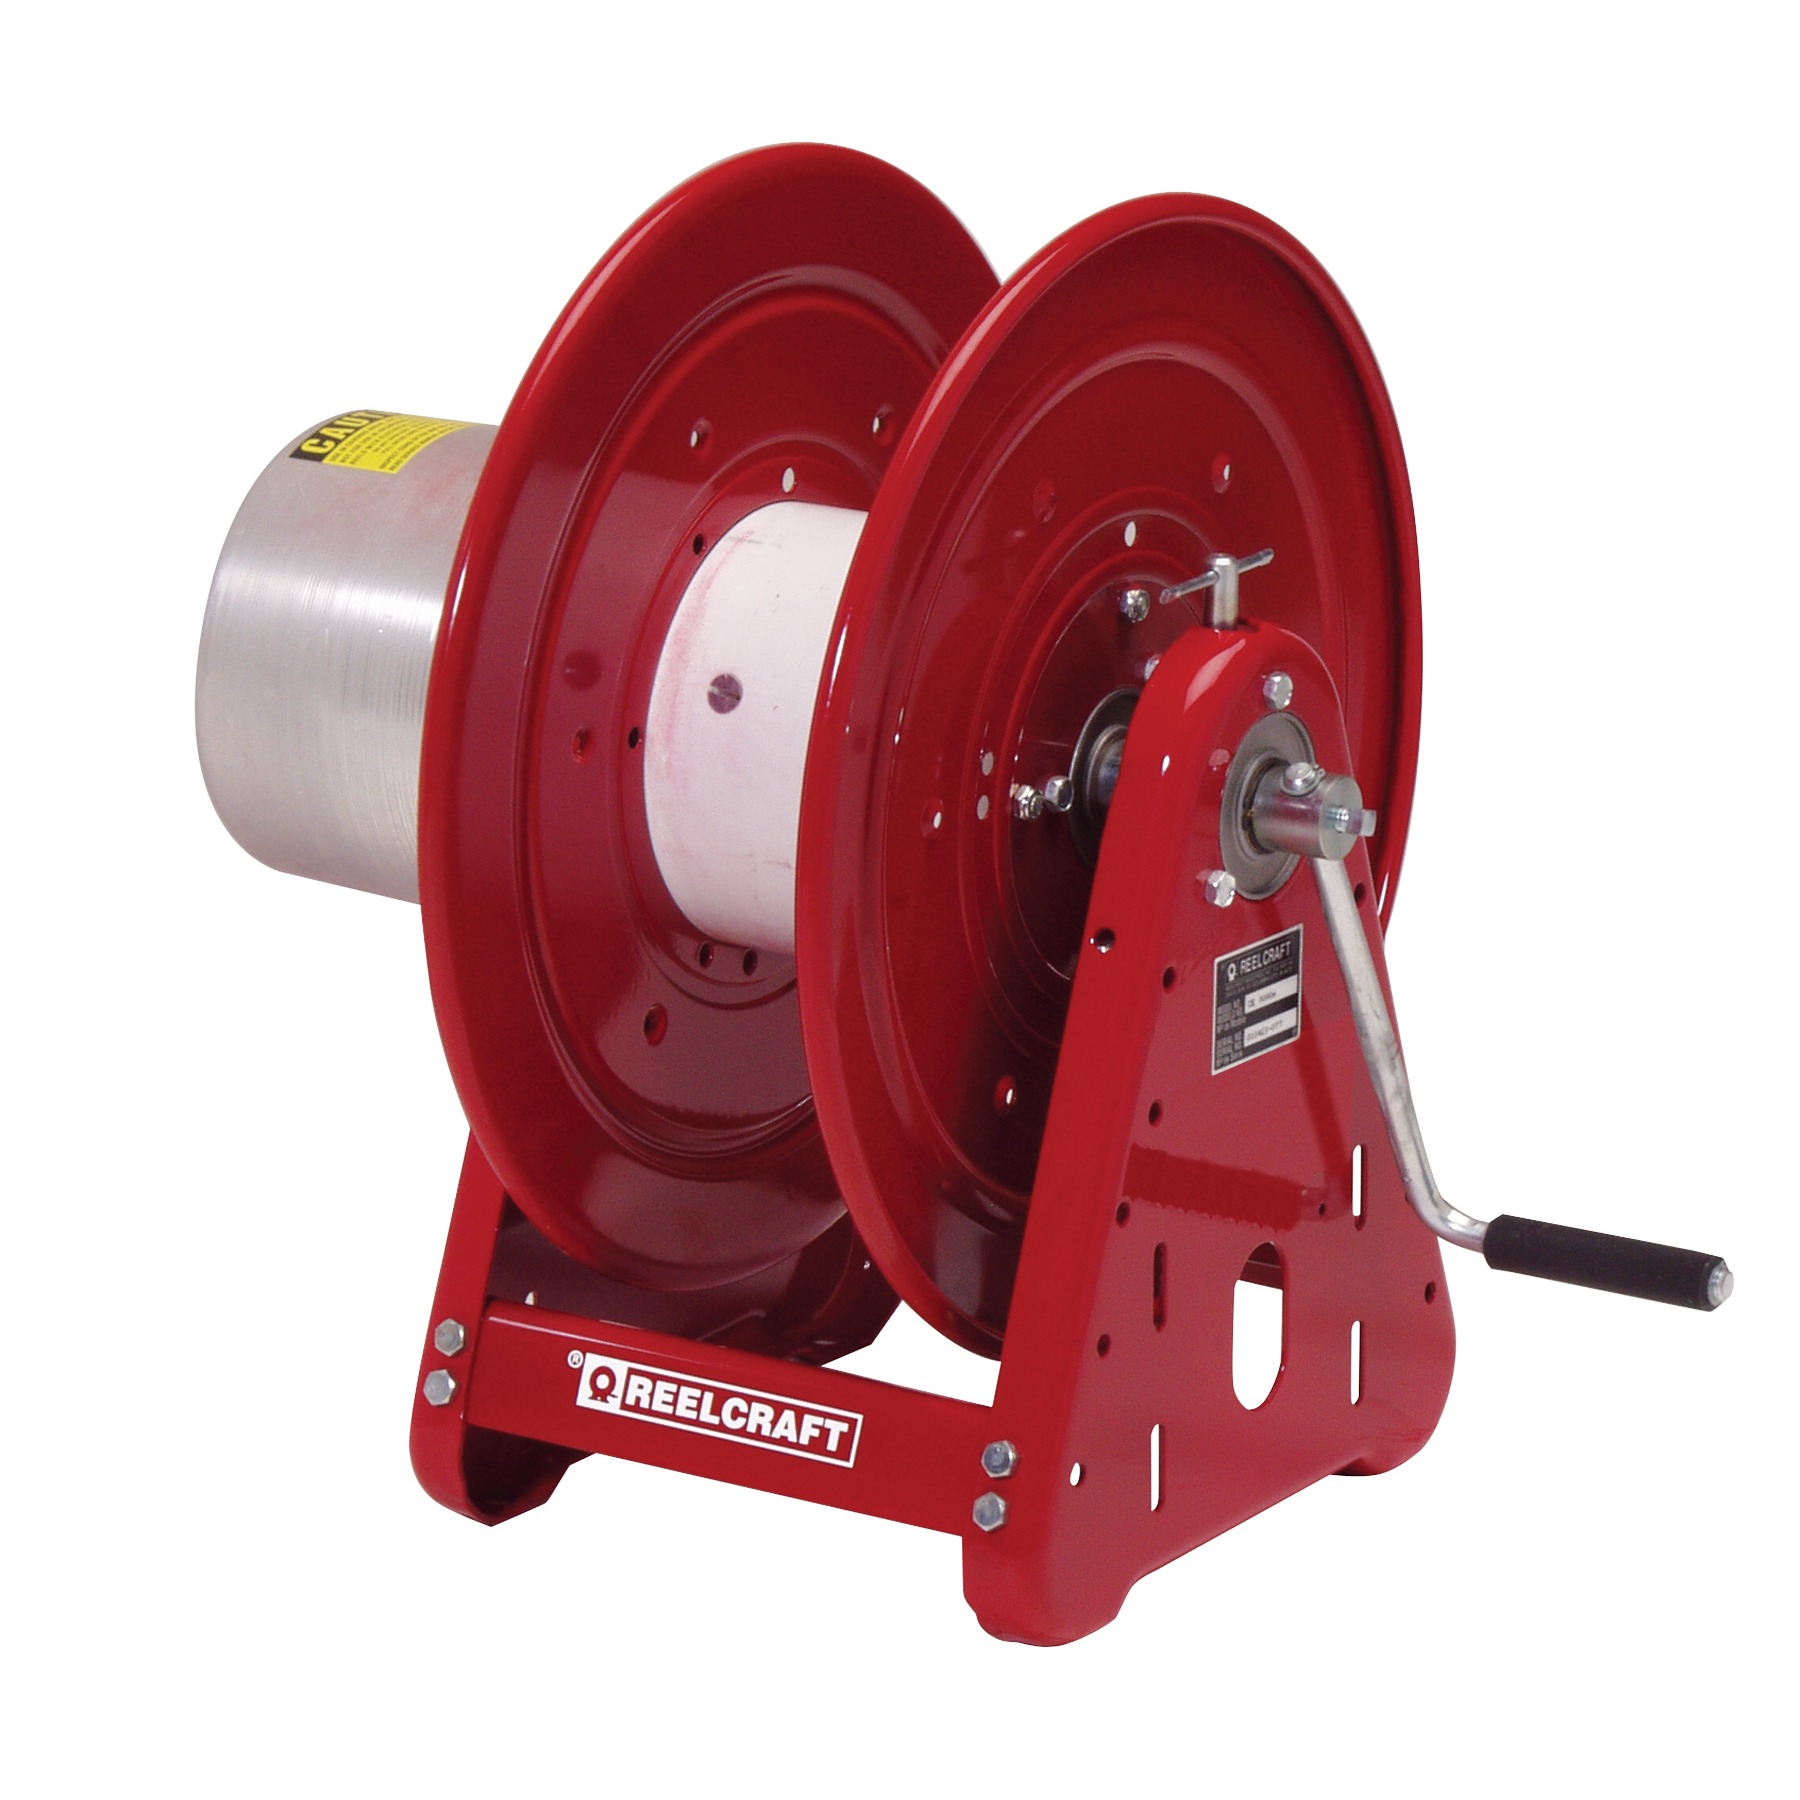 Reelcraft T-1460-0 Arc Welding Cable Reel: 300 A Current (Max), 1